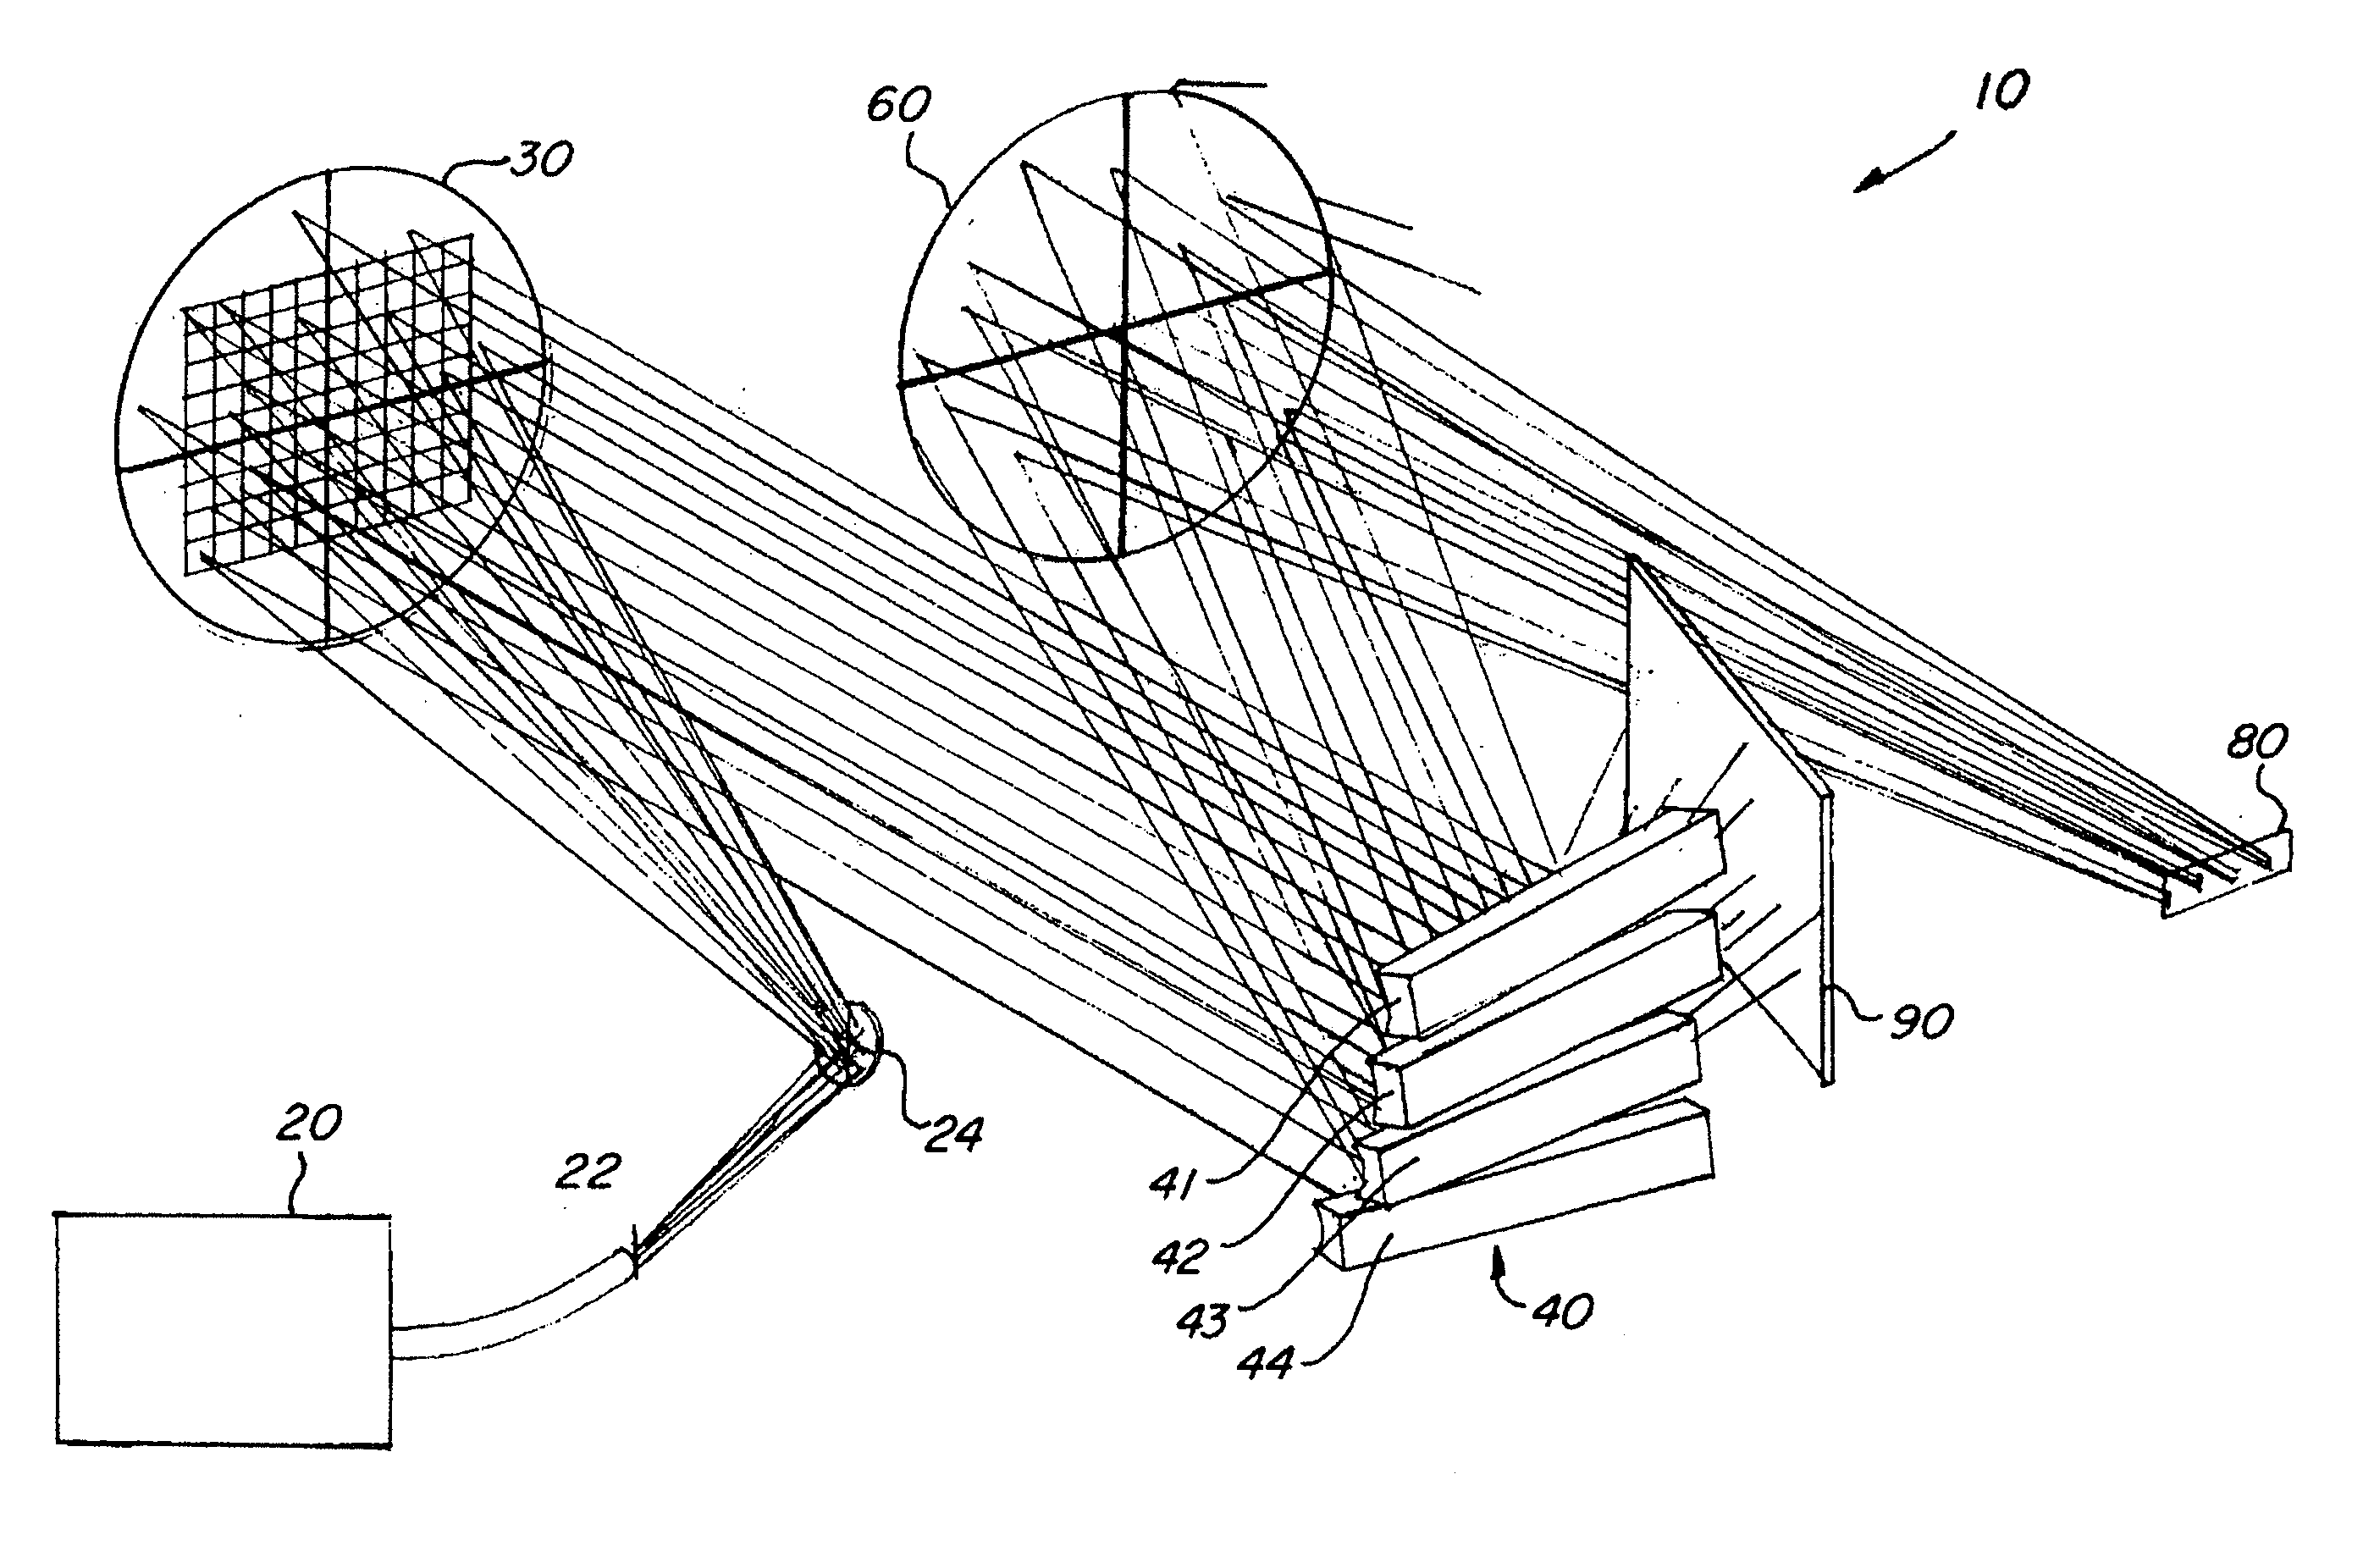 Spectrograph with segmented dispersion device